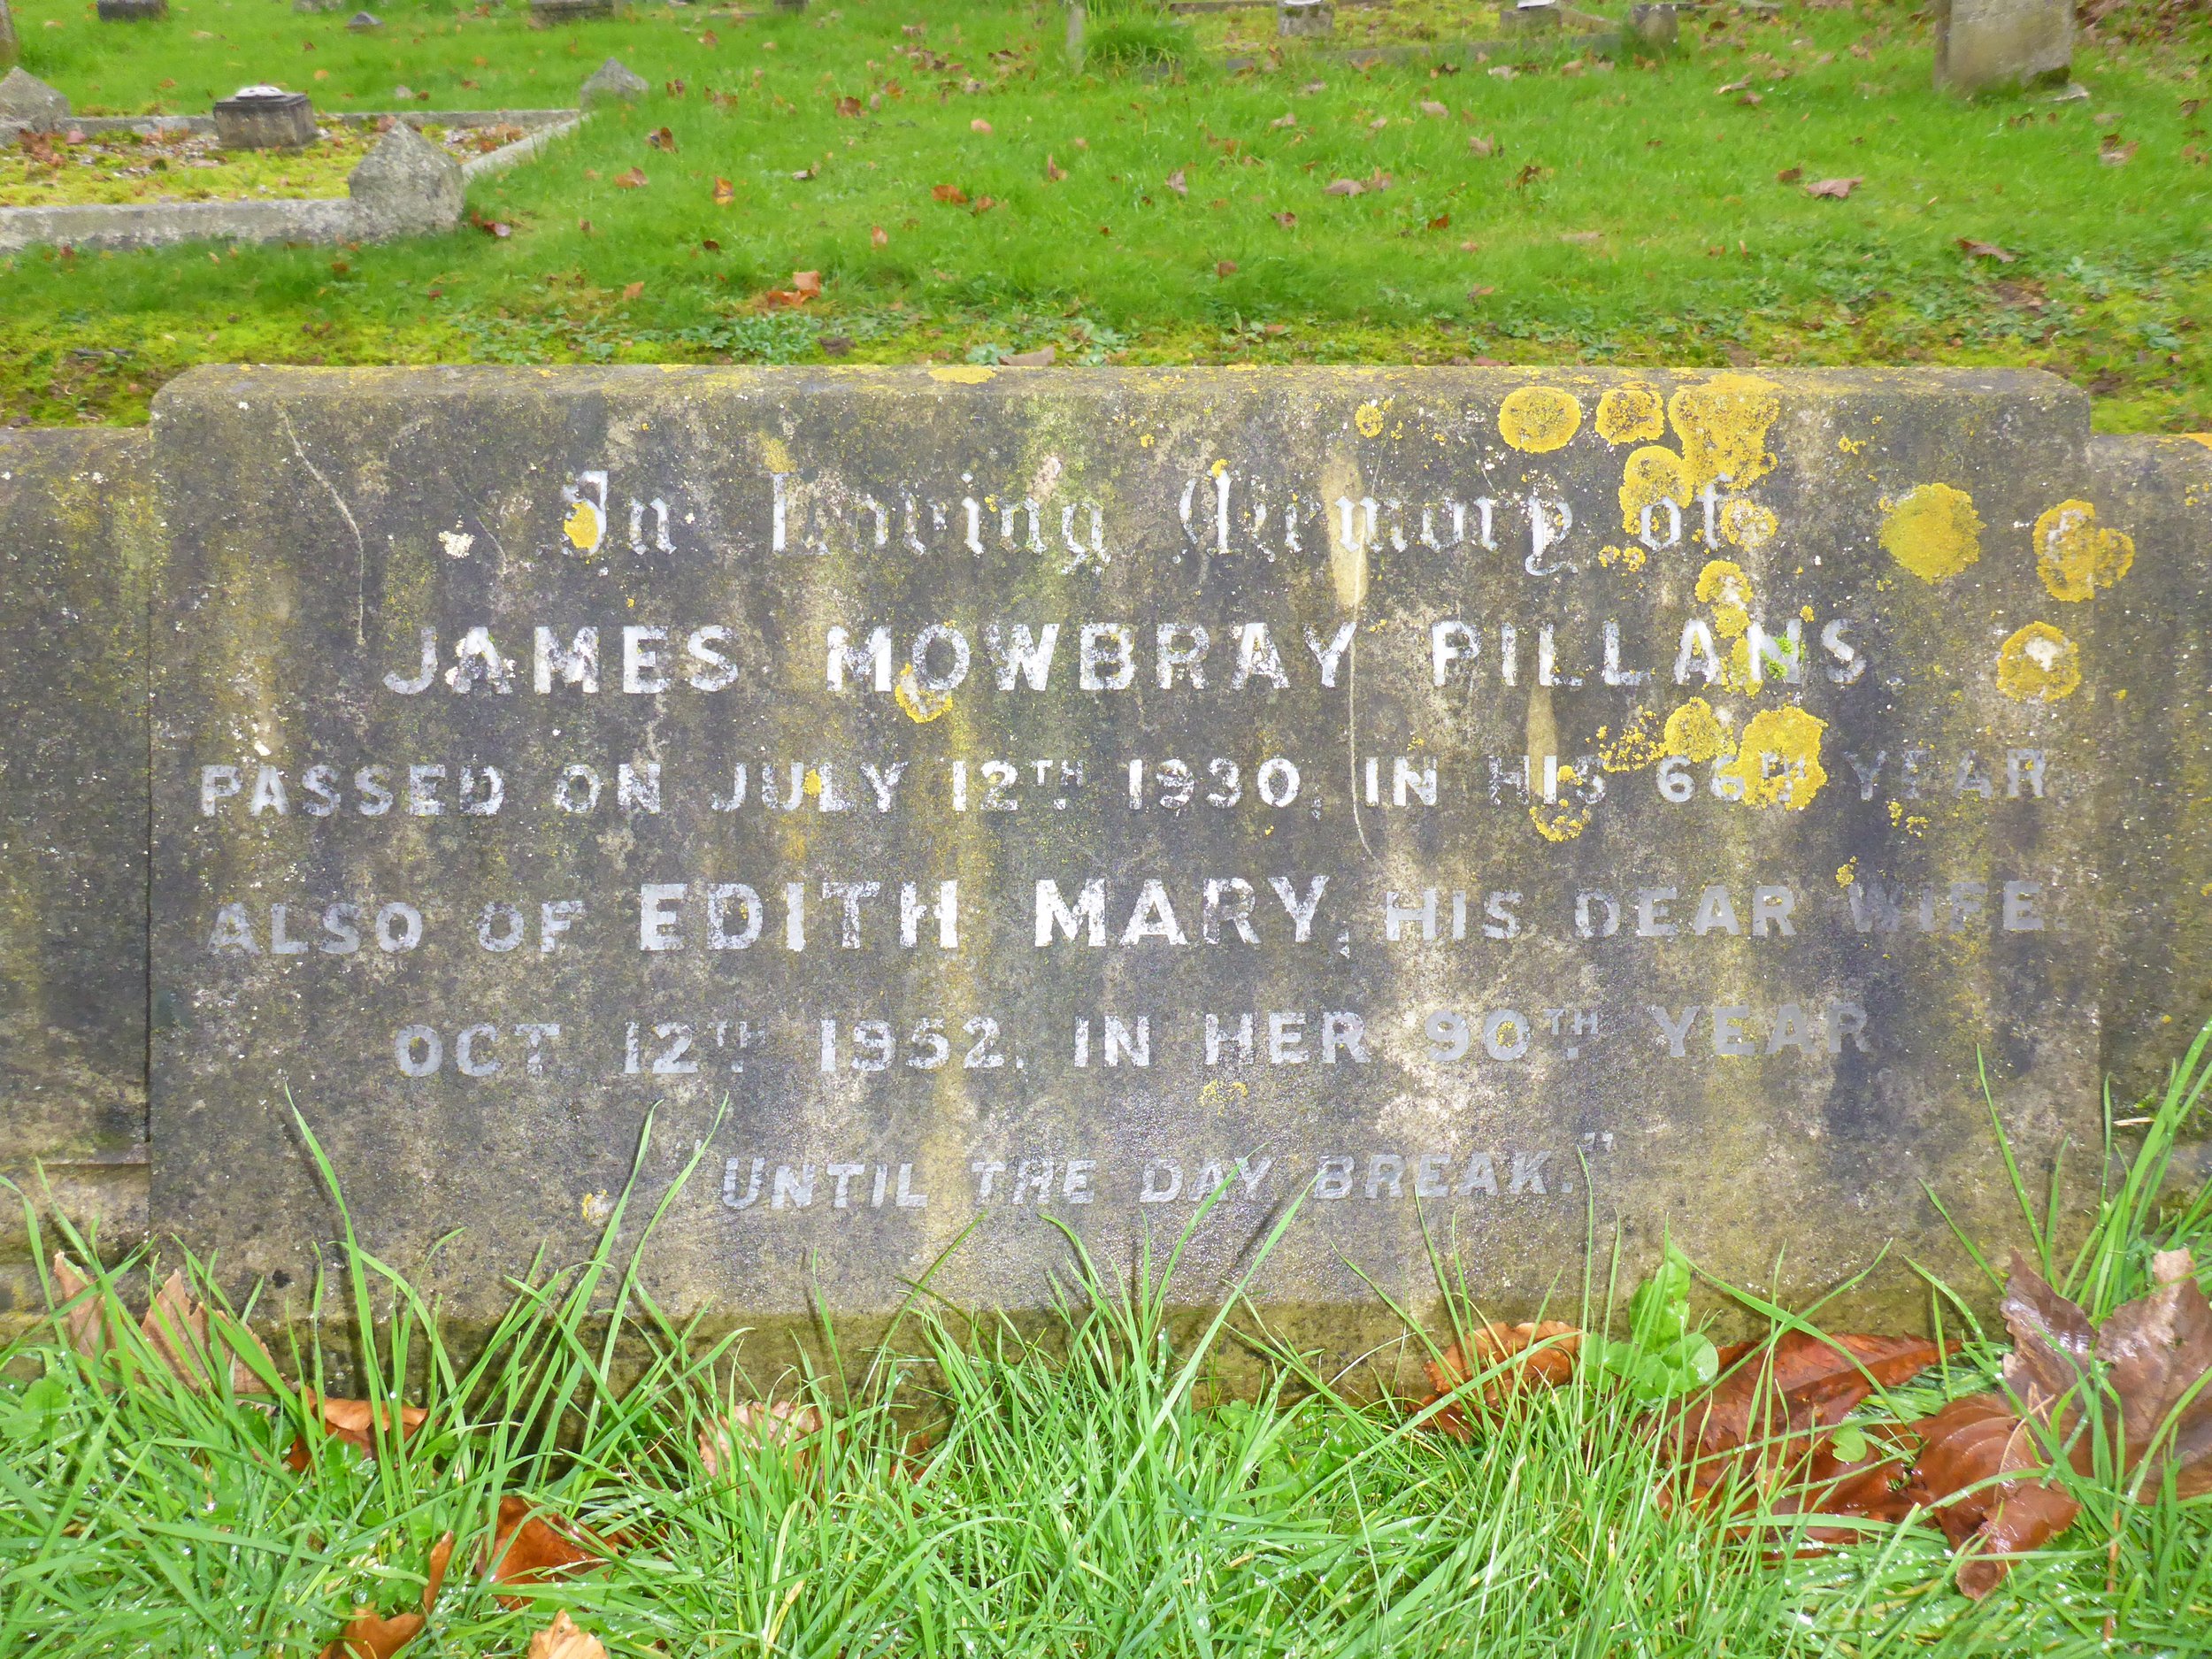  The headstone giving the Pillanses' names and dates. 